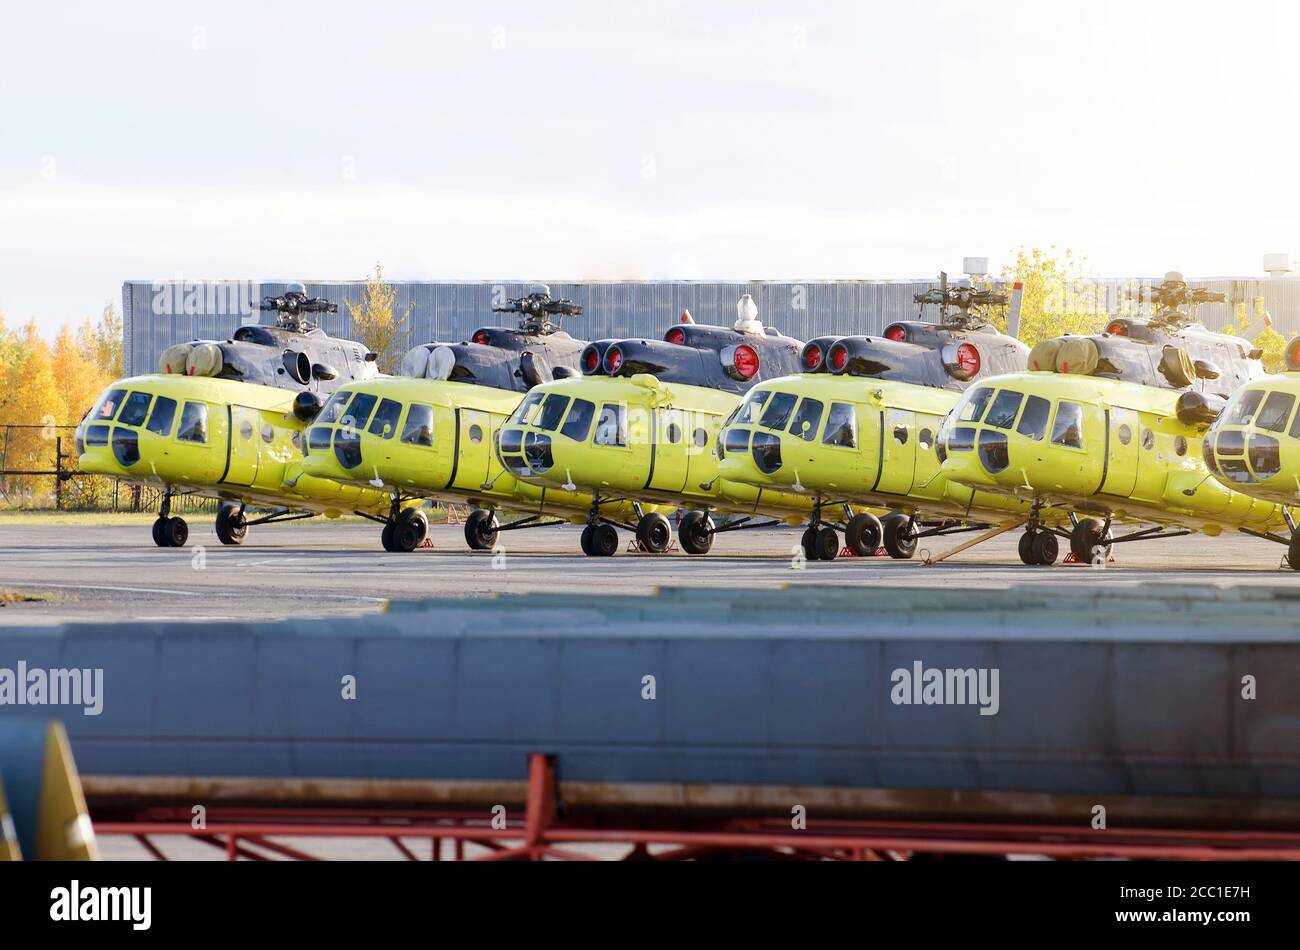 Several helicopters parked at the airport for repairs maintenance Stock Photo